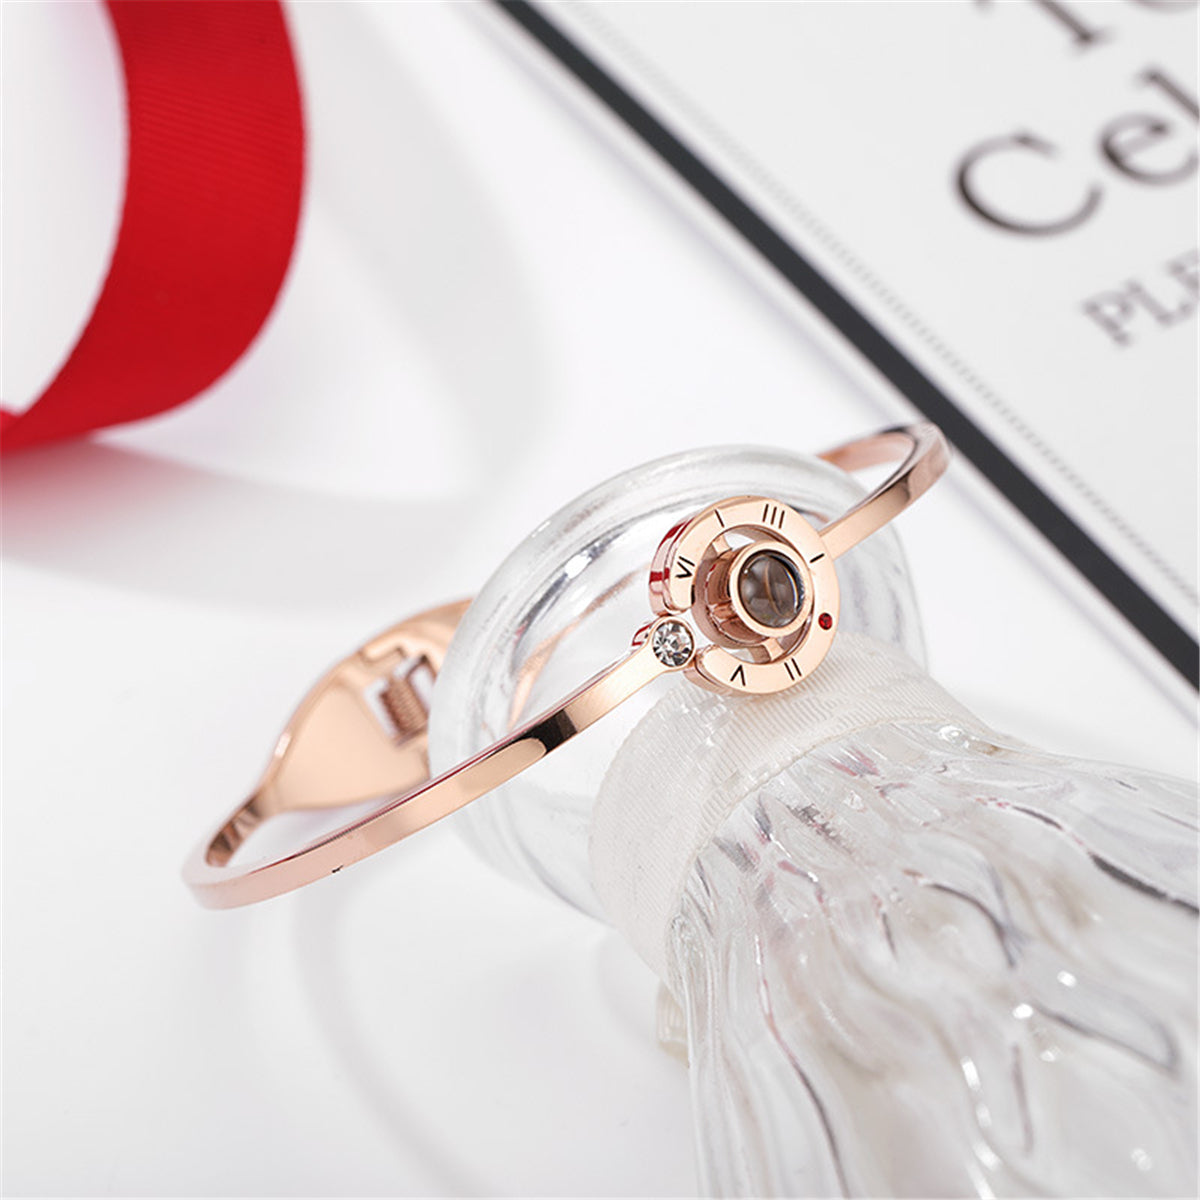 Cubic Zirconia & 18K Rose Gold-Plated 'I Love You' Roman Numeral Hinge Bangle